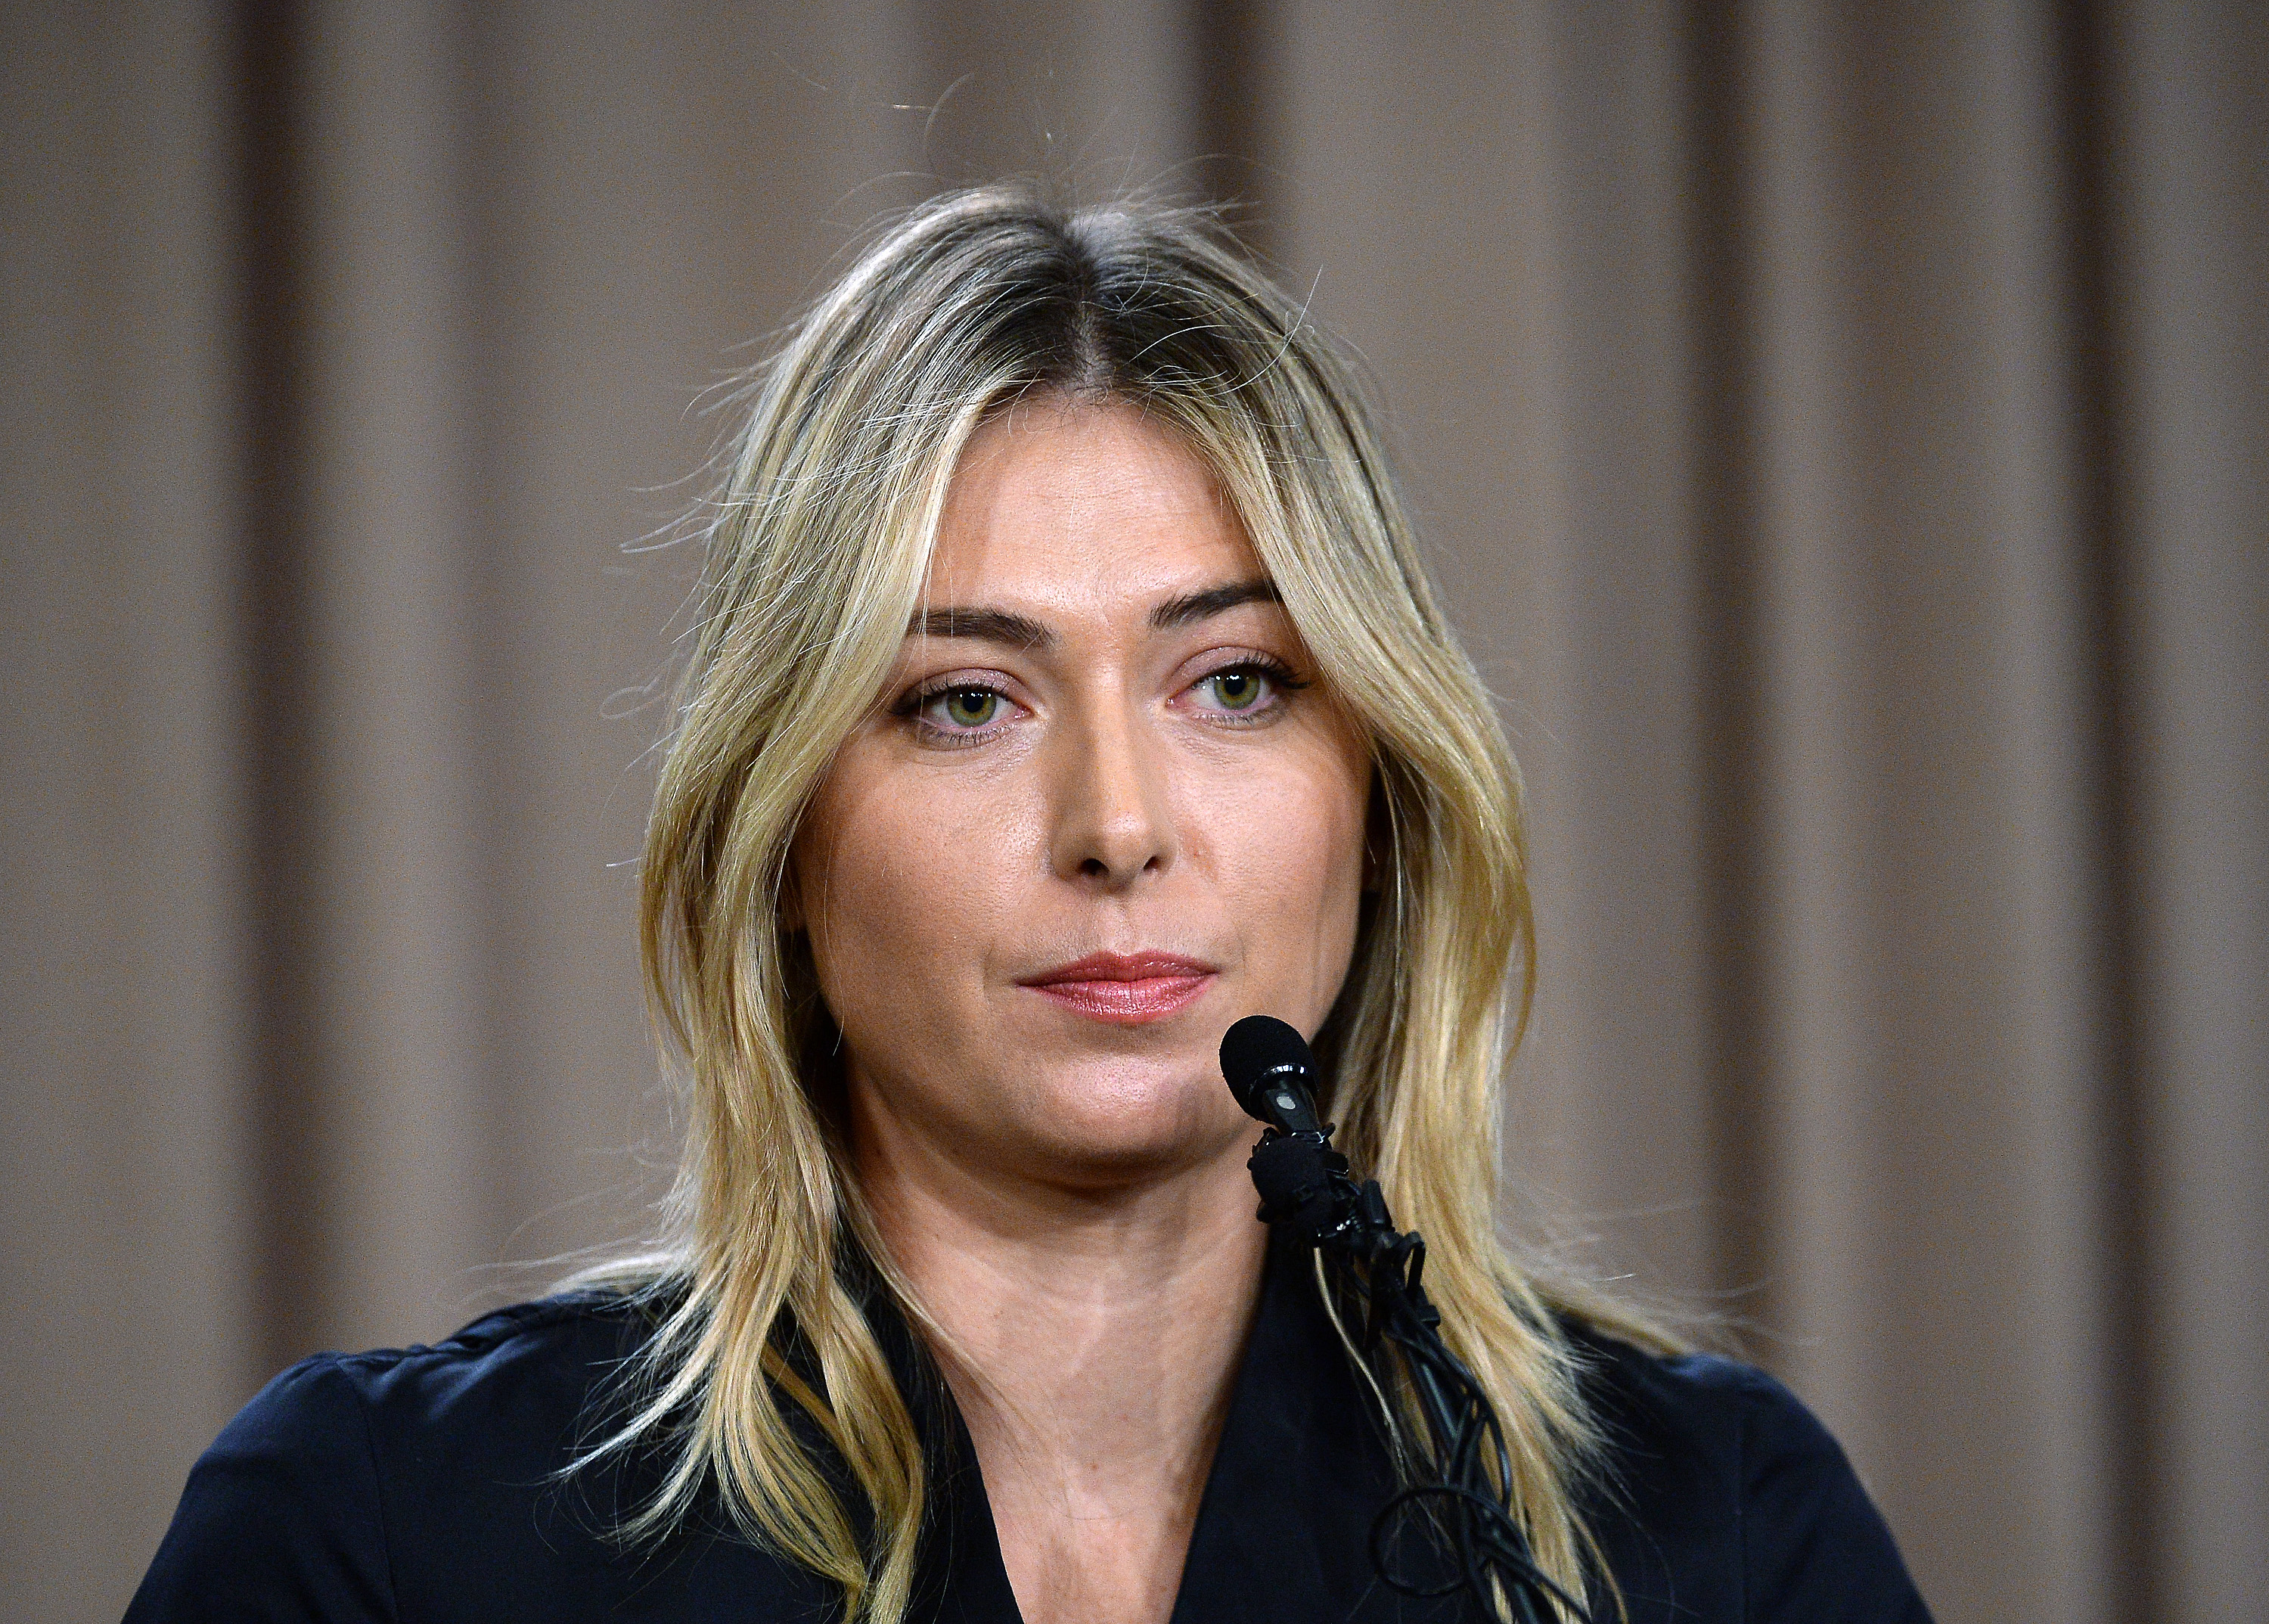 Tennis player Maria Sharapova addresses the media regarding a failed drug test at the Australian Open on March 7, 2016 in Los Angeles, California. (Kevork Djansezian—Getty Images)